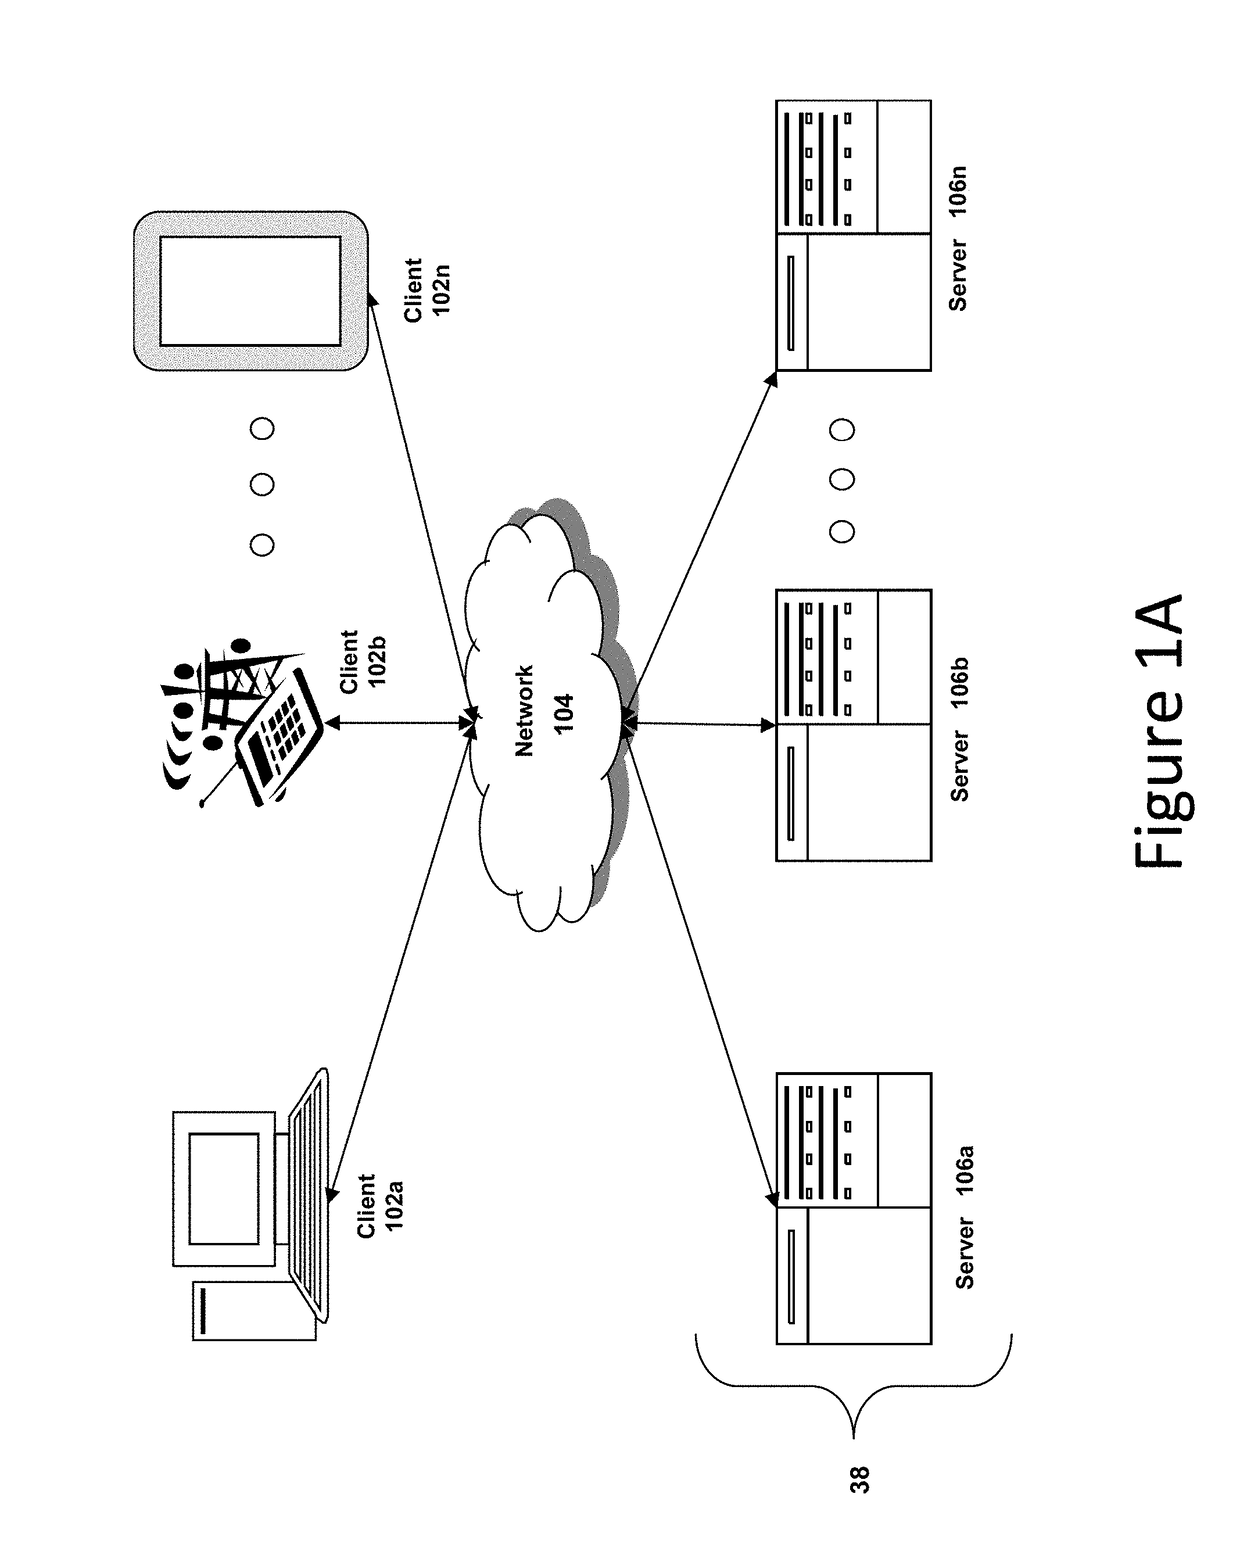 Systems and methods for establishing communication interfaces to monitor online interactions via event listeners